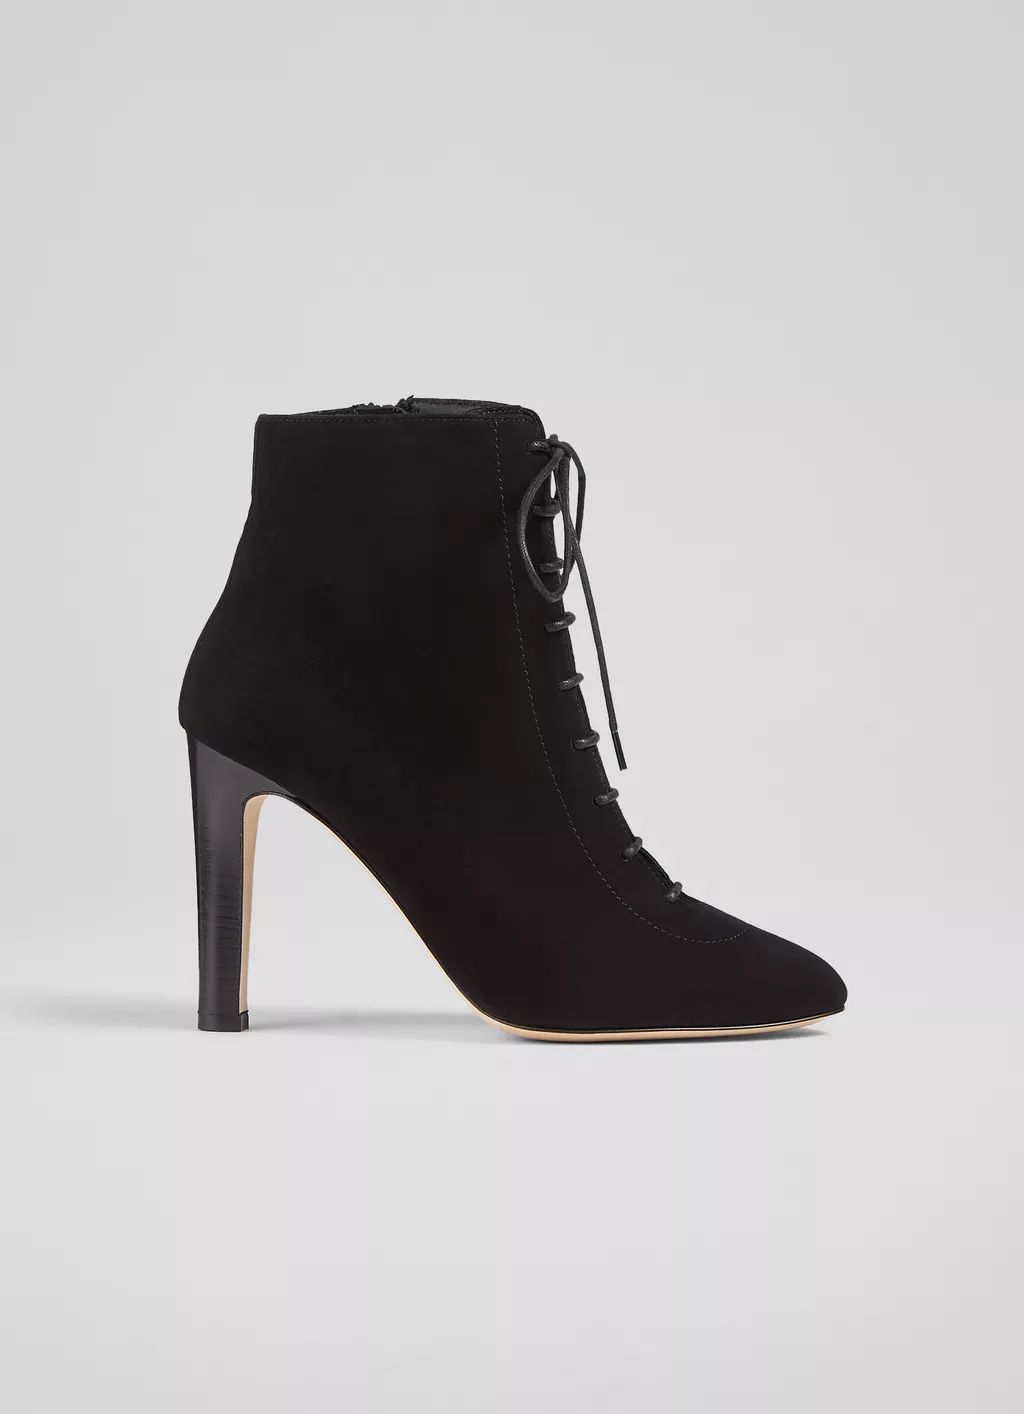 Lydia Black Suede Lace-Up Ankle Boots | L.K. Bennett (UK)